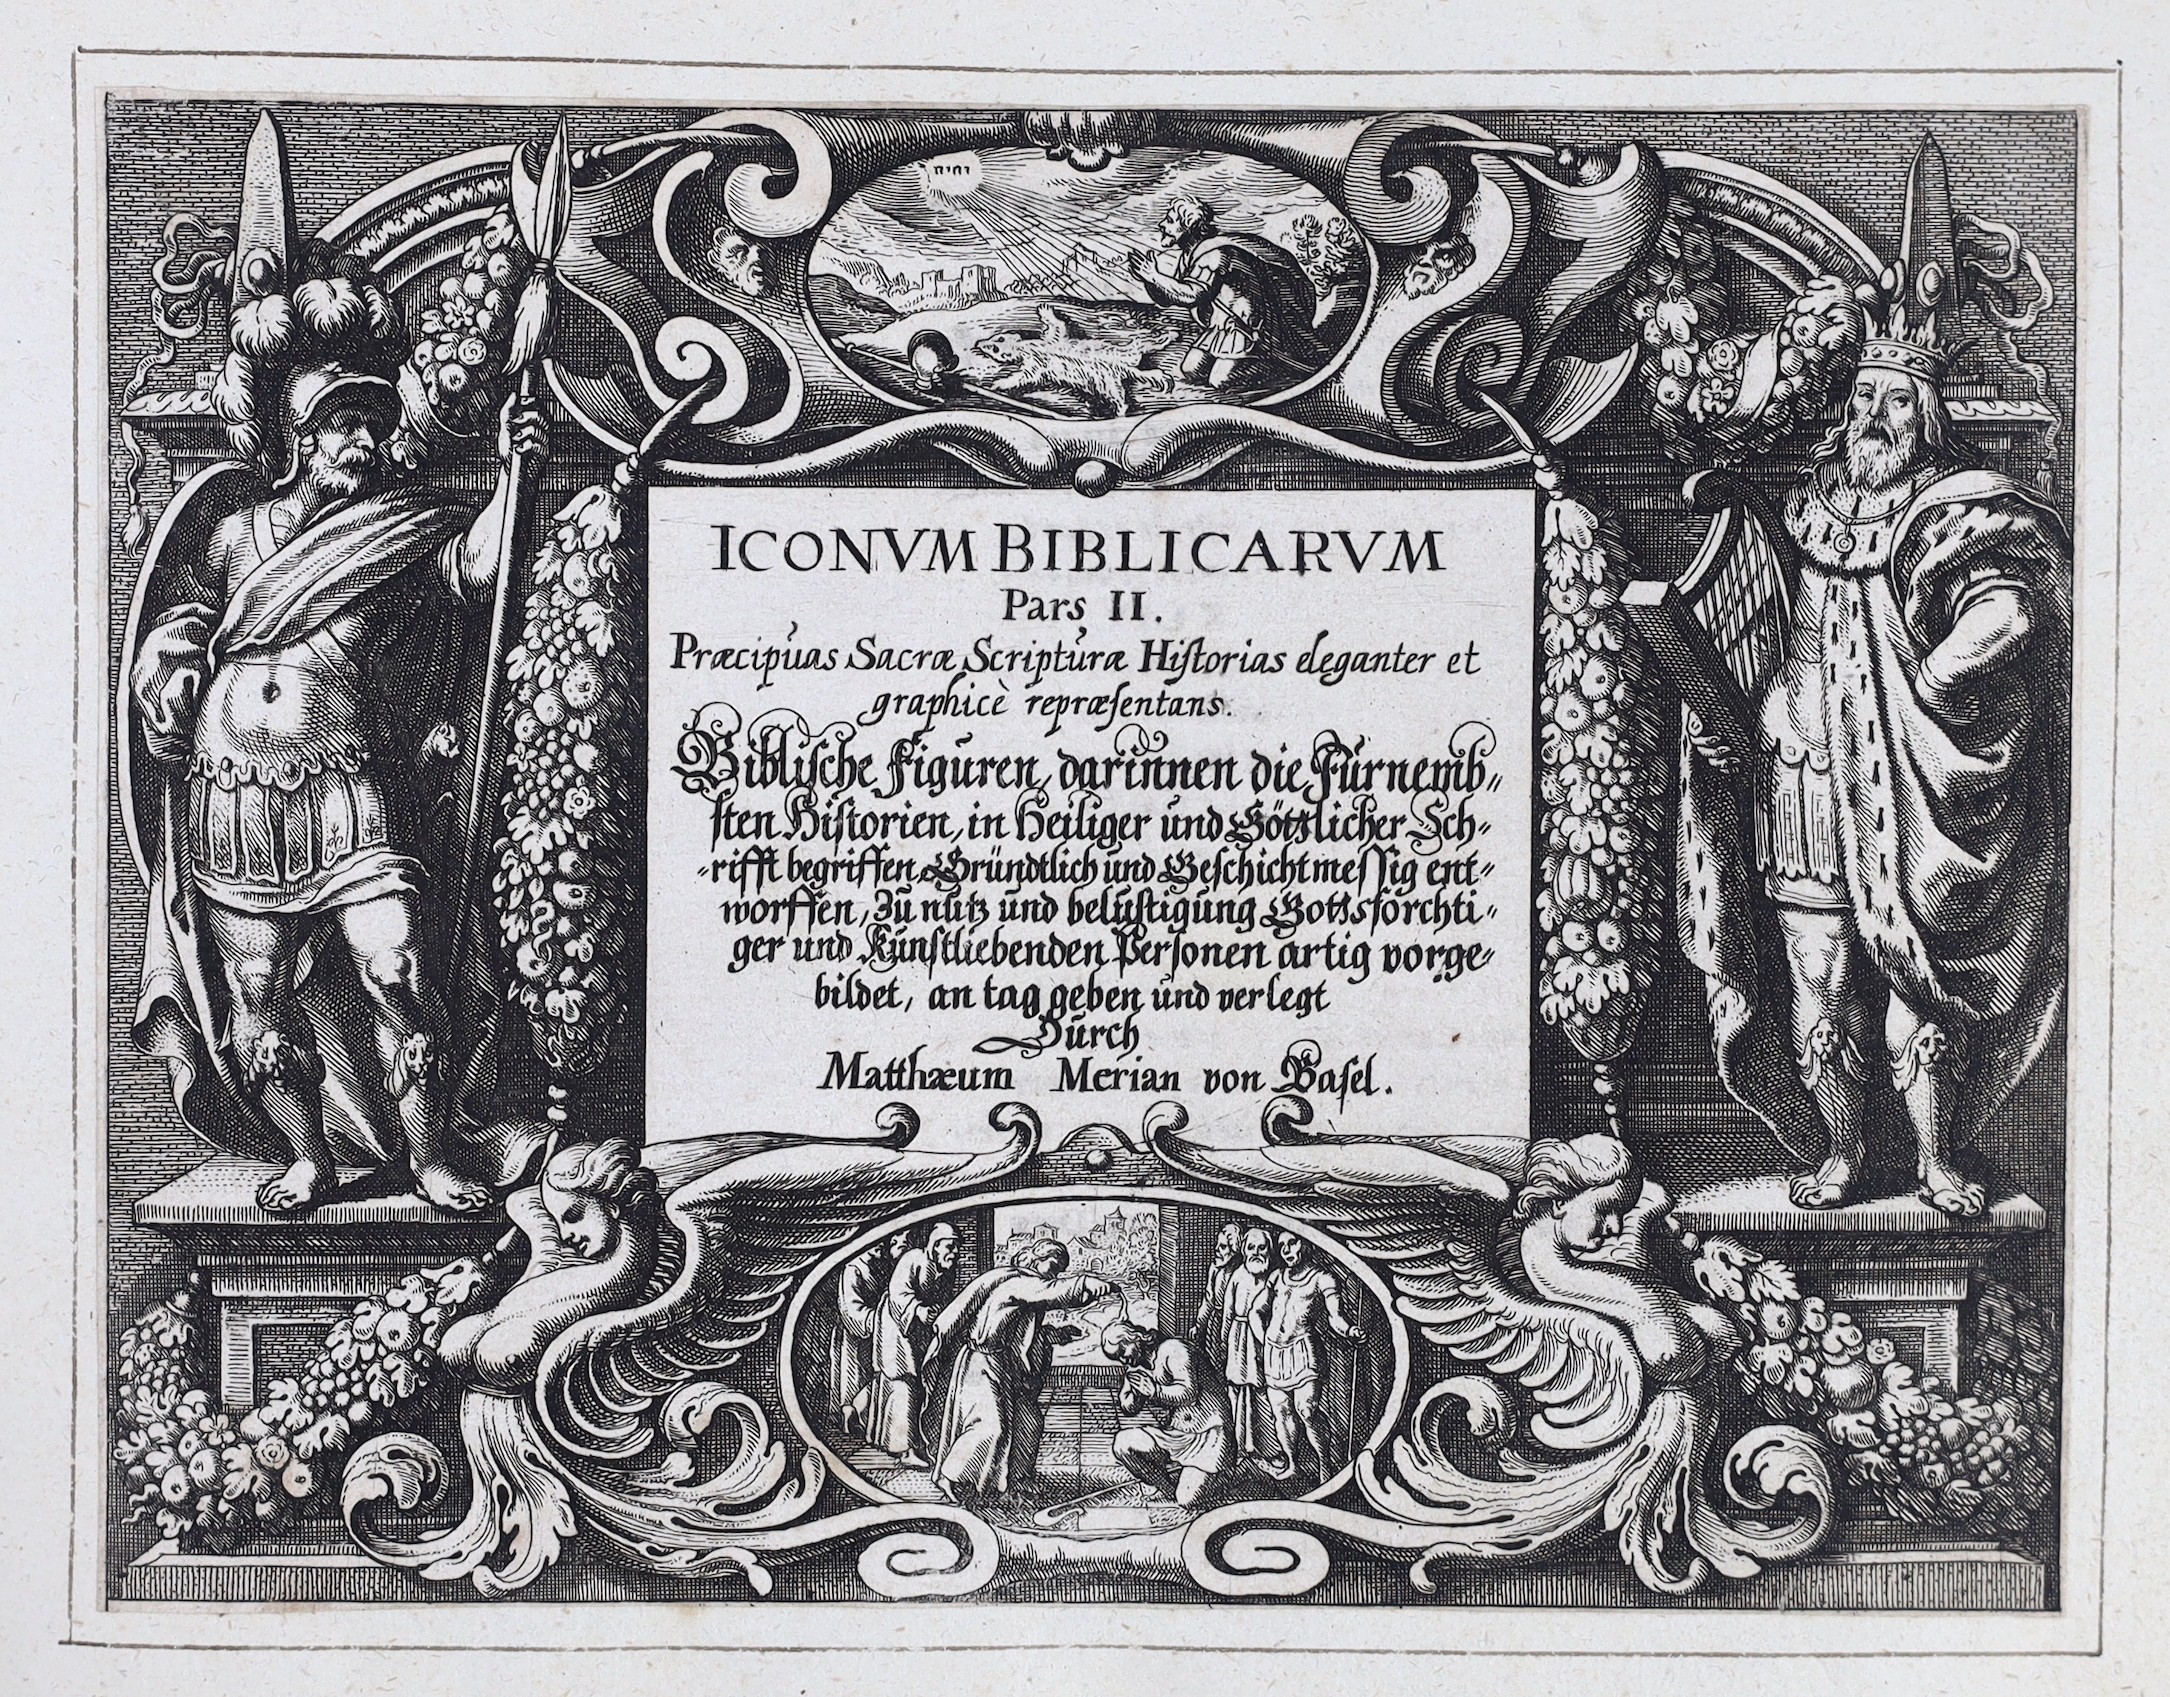 Merian, Matthew - Iconum Biblicarum. Praecipuas Sacrae Scripturae....engraved pictorial and printed titles and 233 plates; newly rebound mottled calf, blind ruled upper cover and panelled spine, oblong folio. Strasburg,